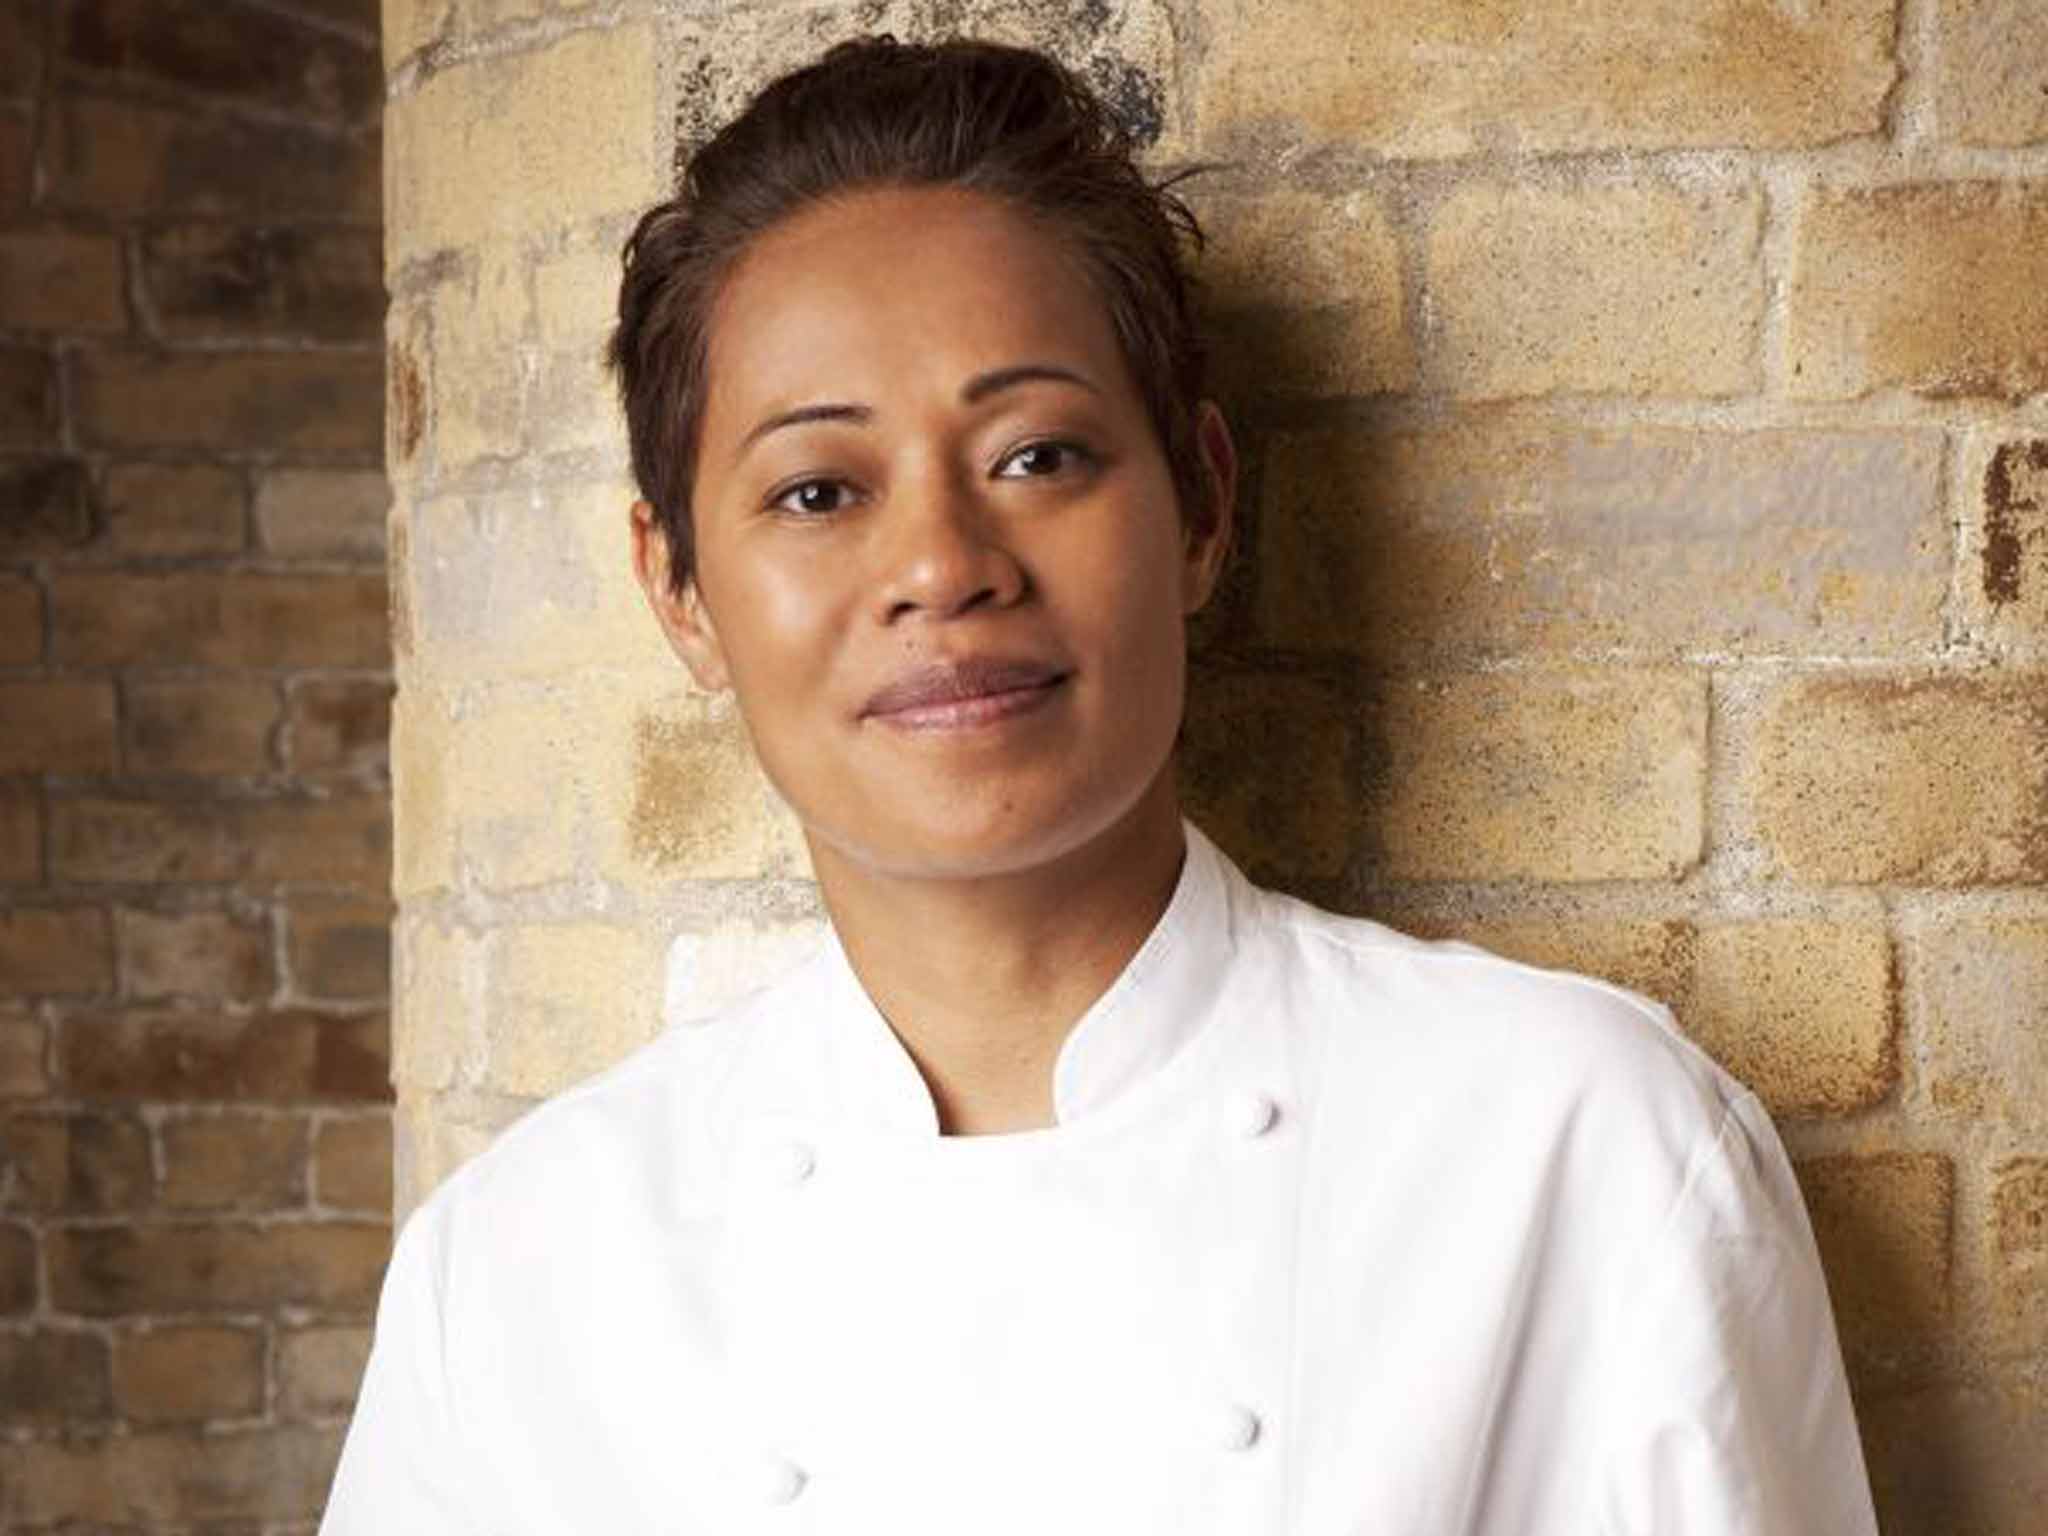 Chef Monica Galetti is appearing at Taste of London: The Festive Edition this weekend